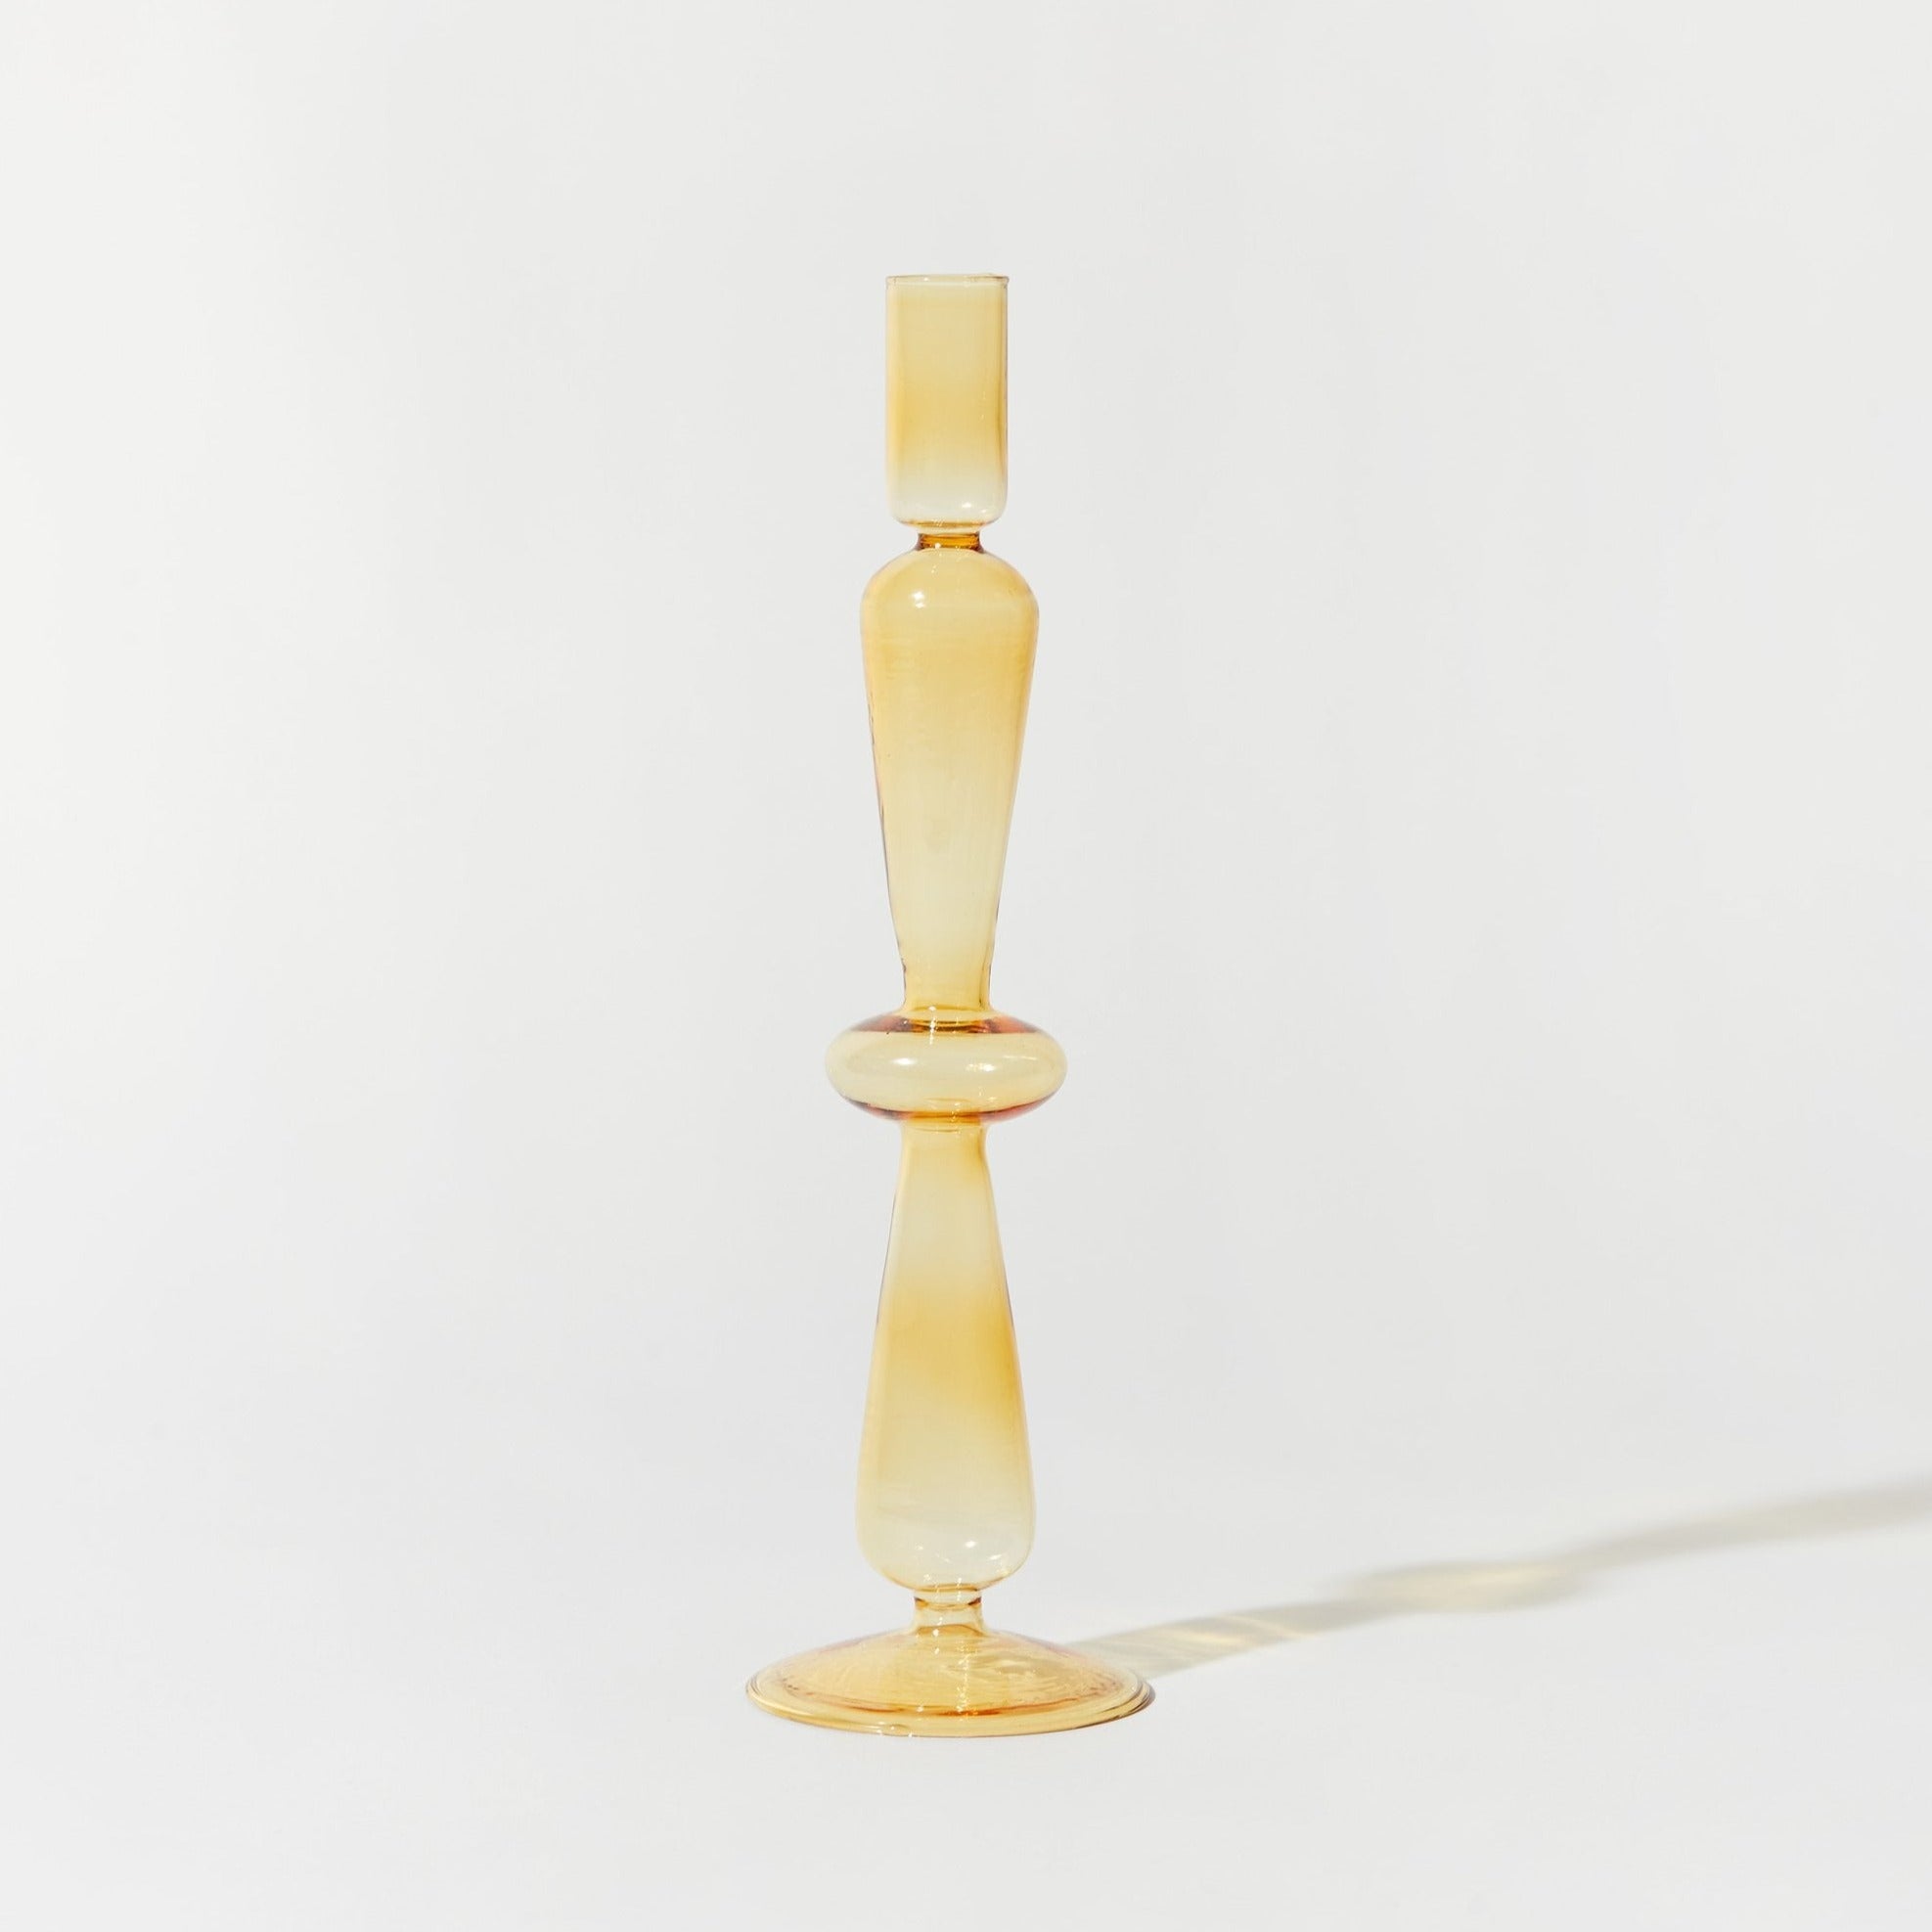 Aeyre - Fisca Candlestick Holder